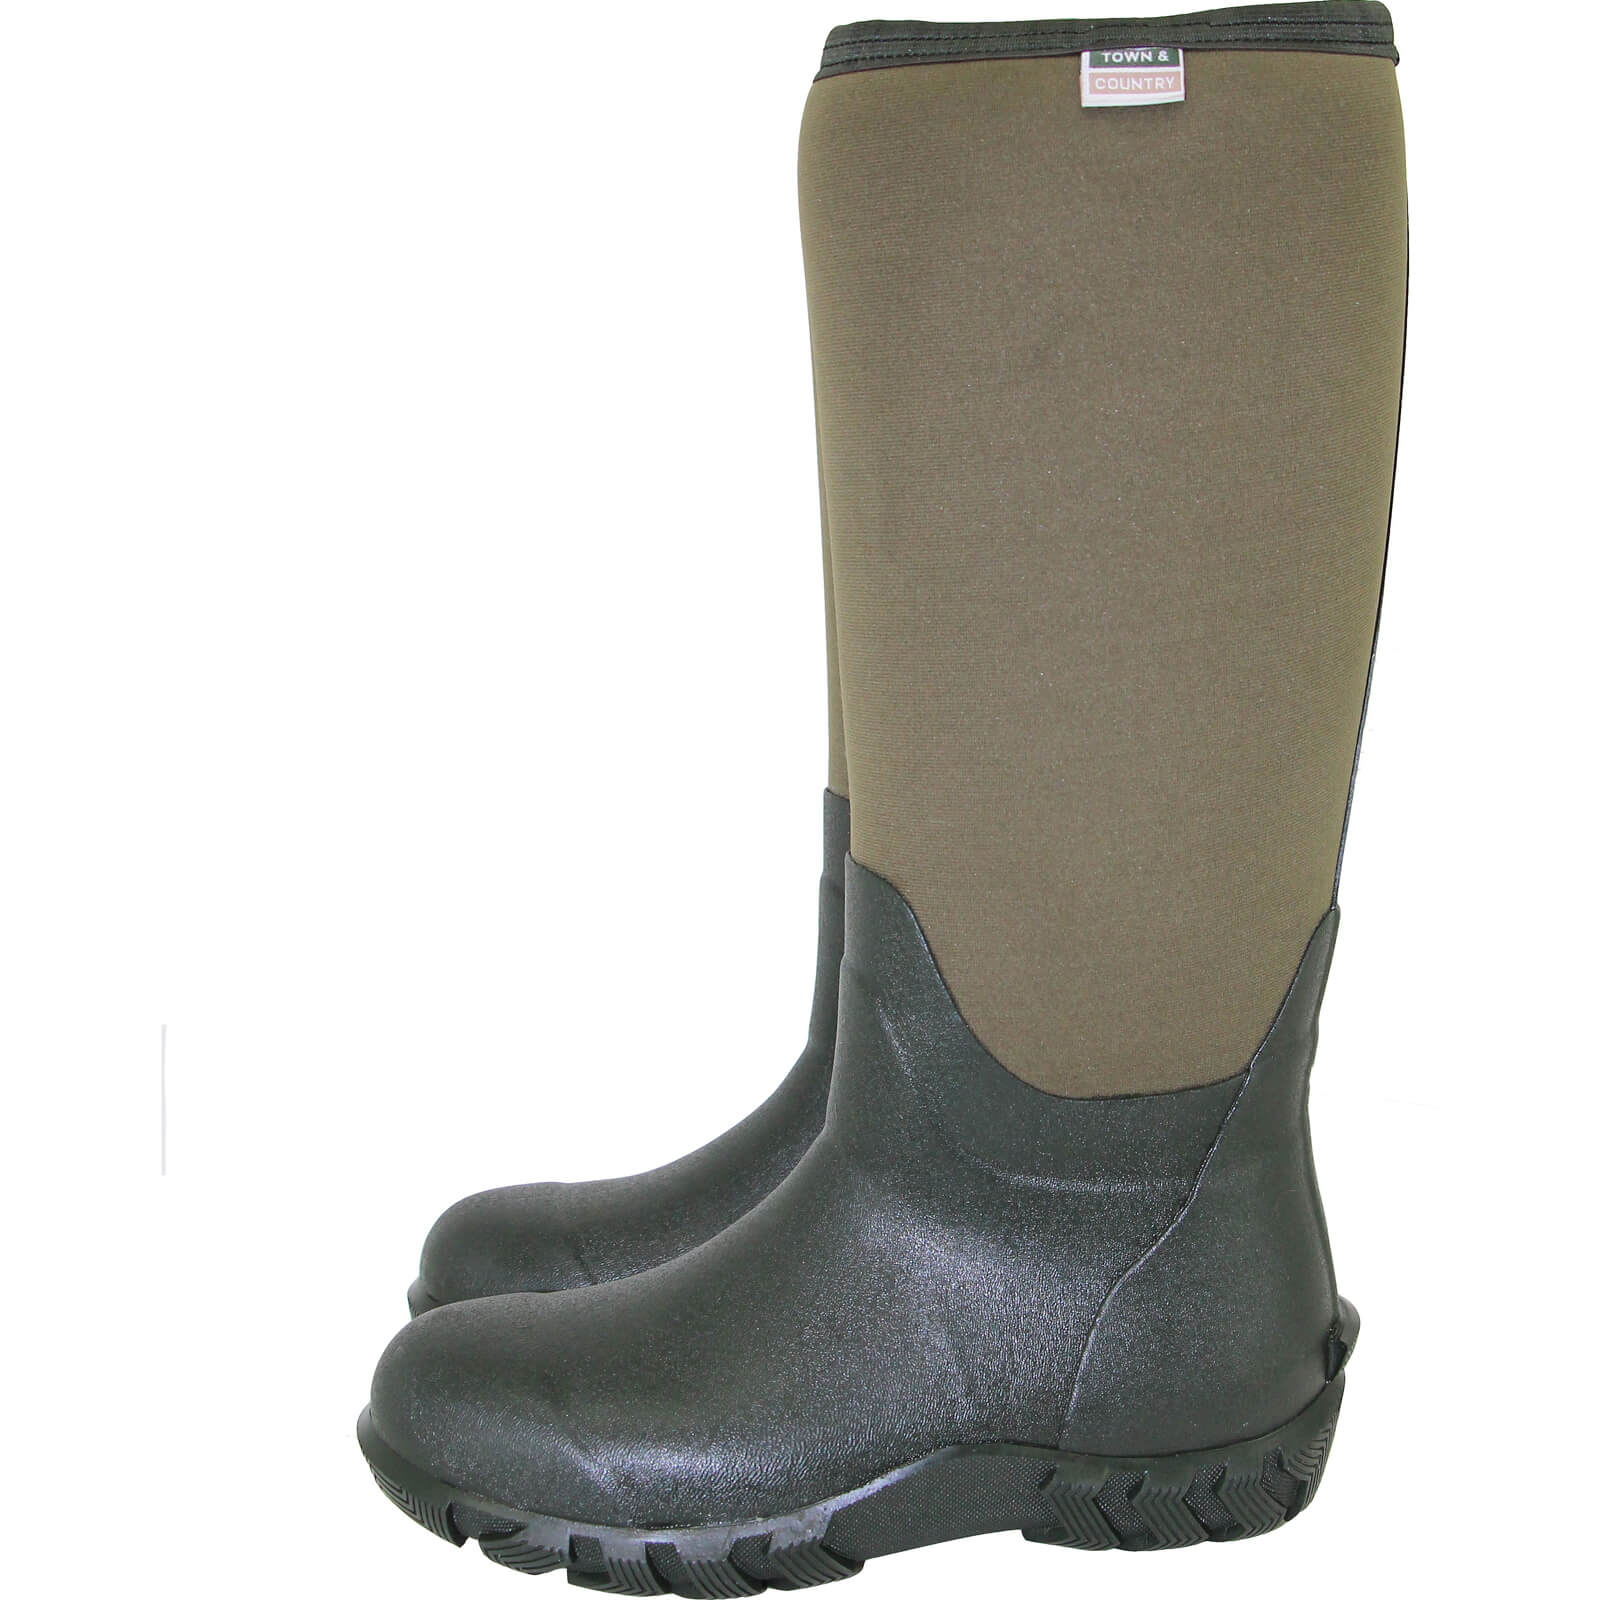 Image of Town and Country Buckingham Rubber Wellington Boots Green Size 6